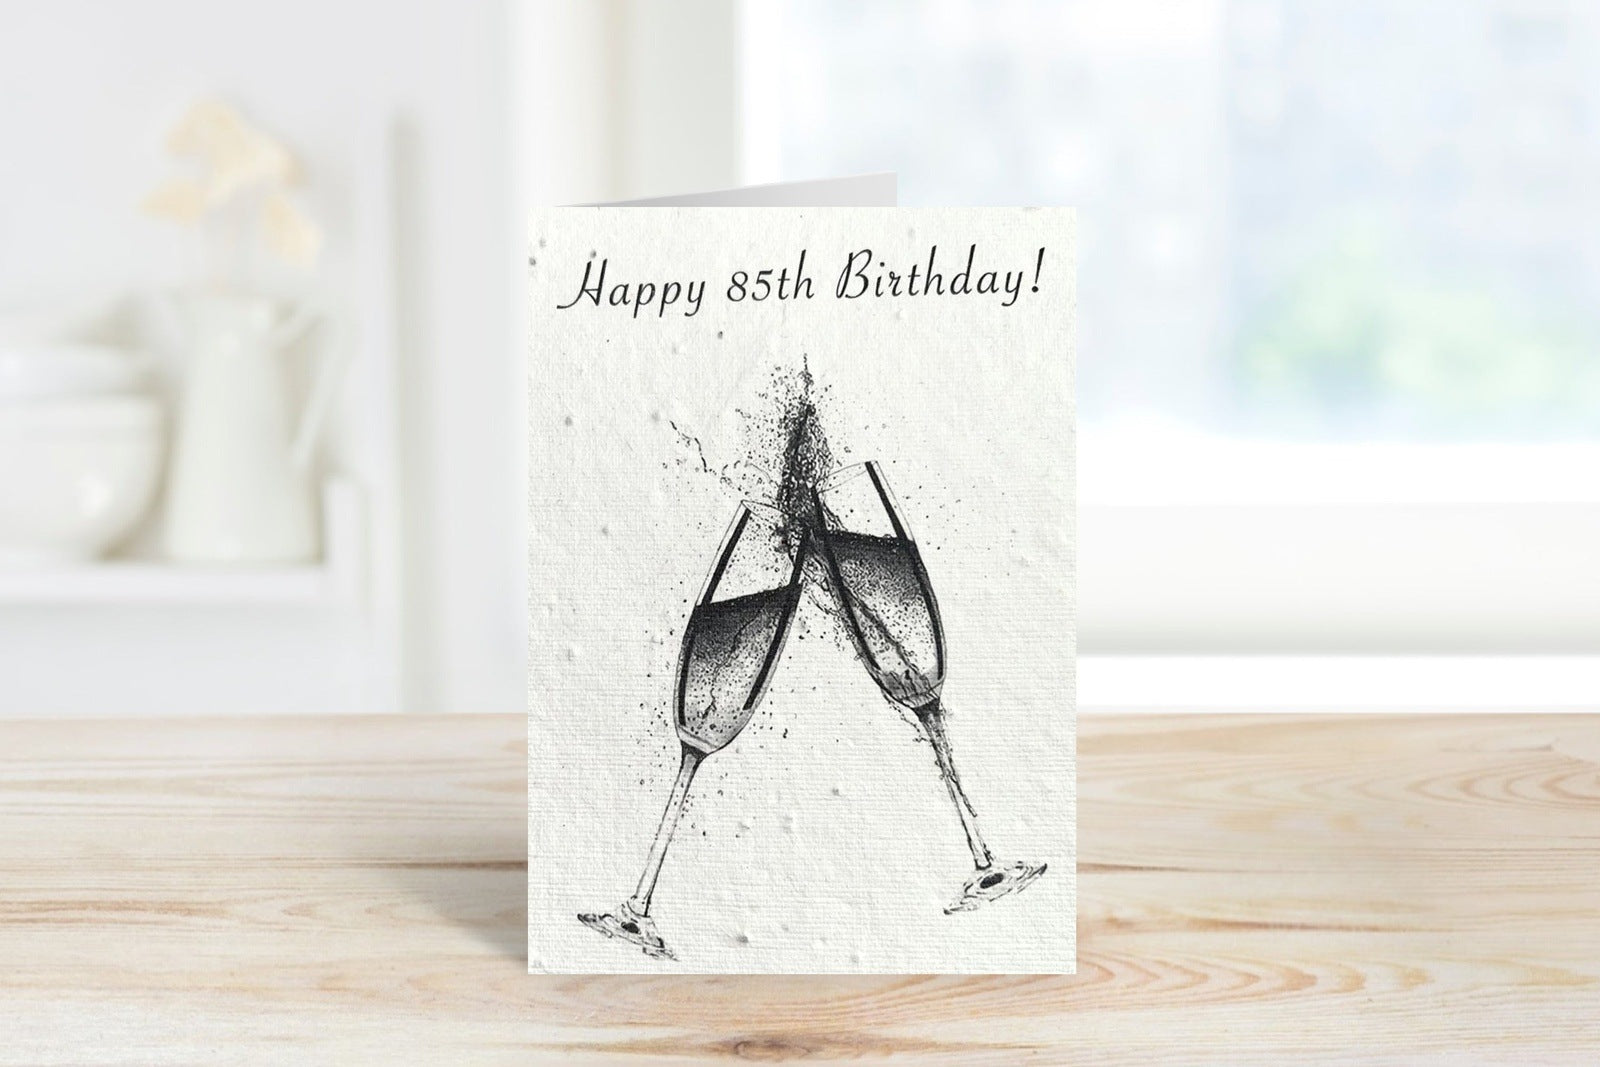 Happy 85th Birthday Plantable Seeded Eco Greeting Card